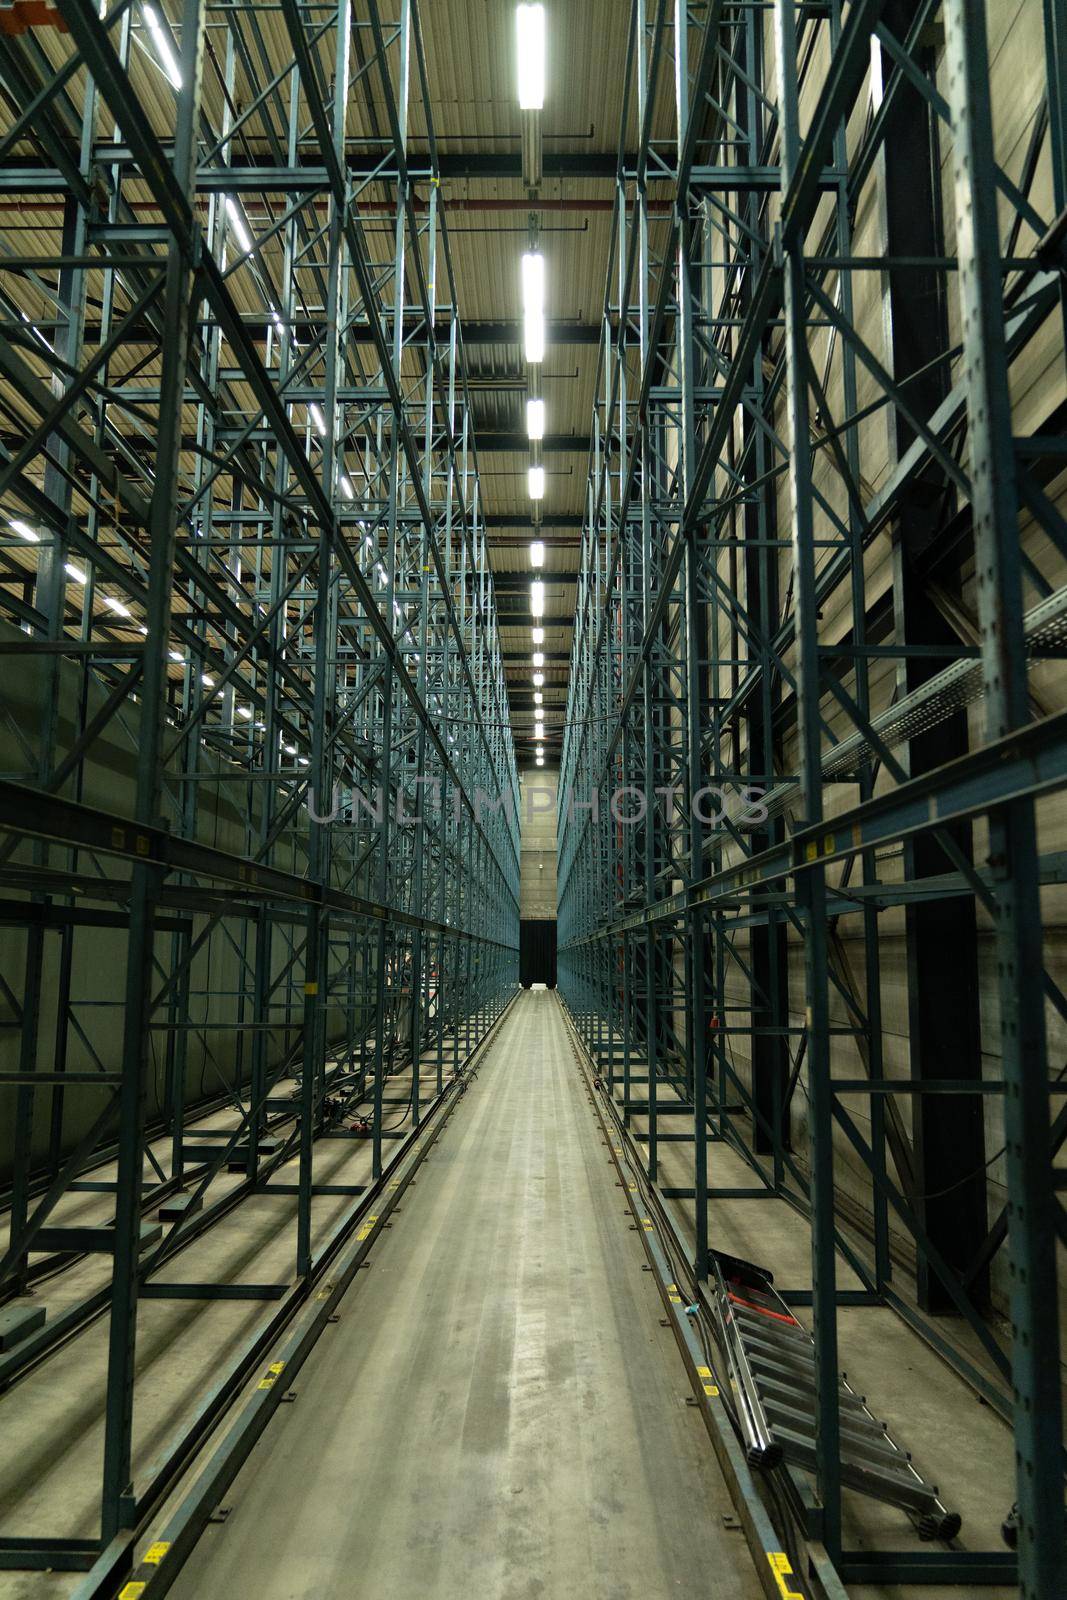 A perspective view of an old warehouse rack in green